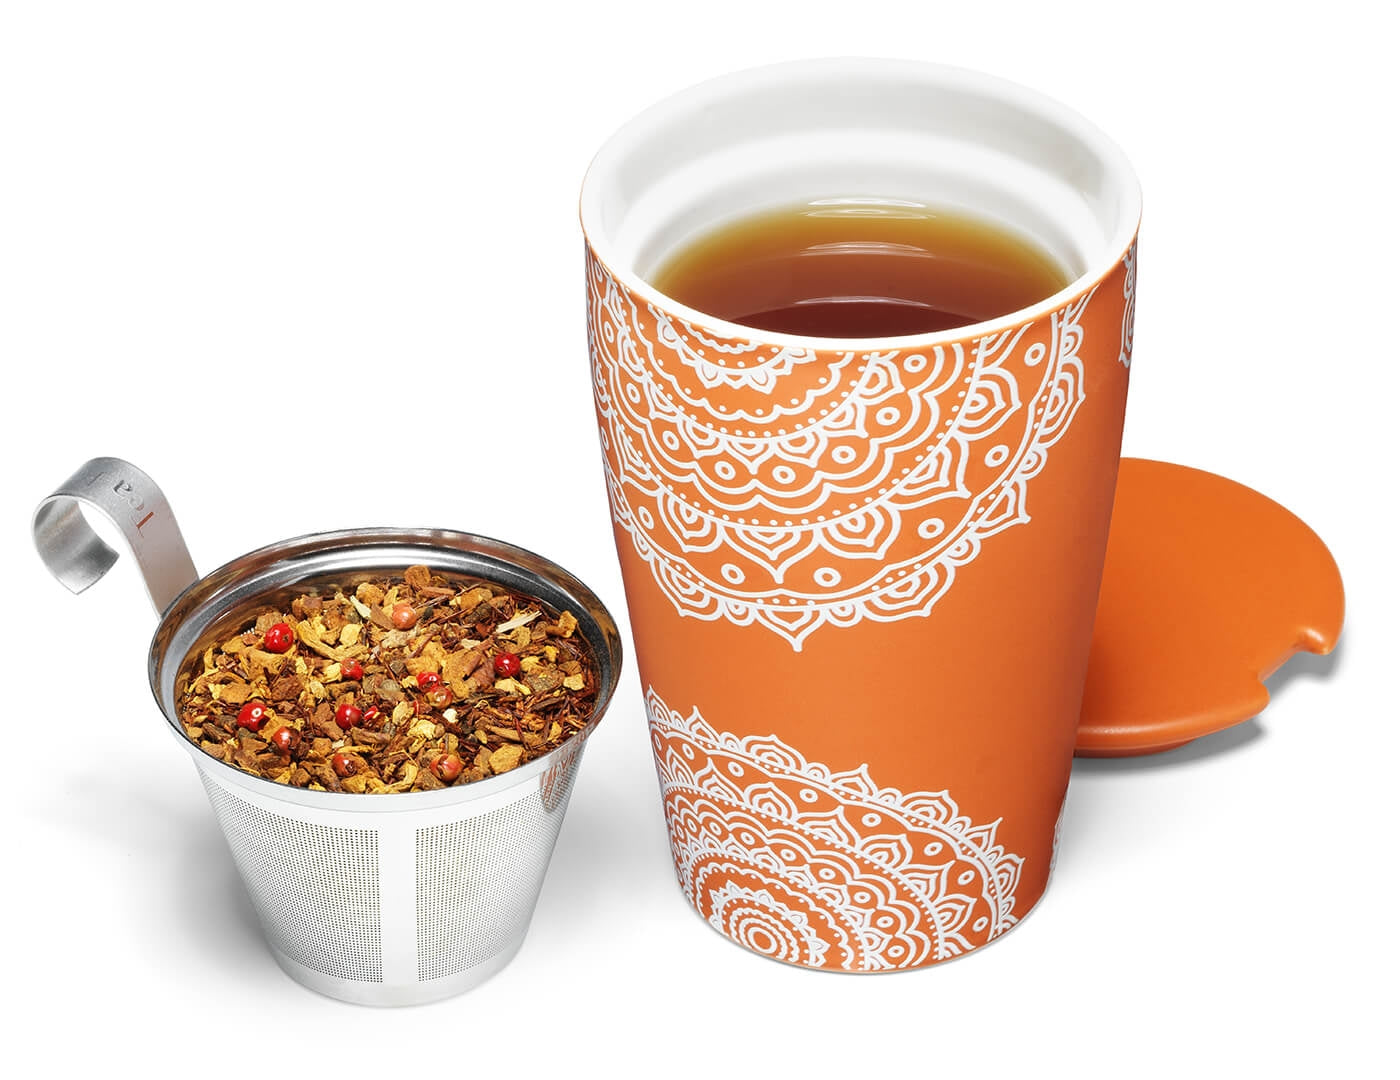 Jardin design KATI® Steeping cup with infuser showing stainless steel infuser with tea leaves